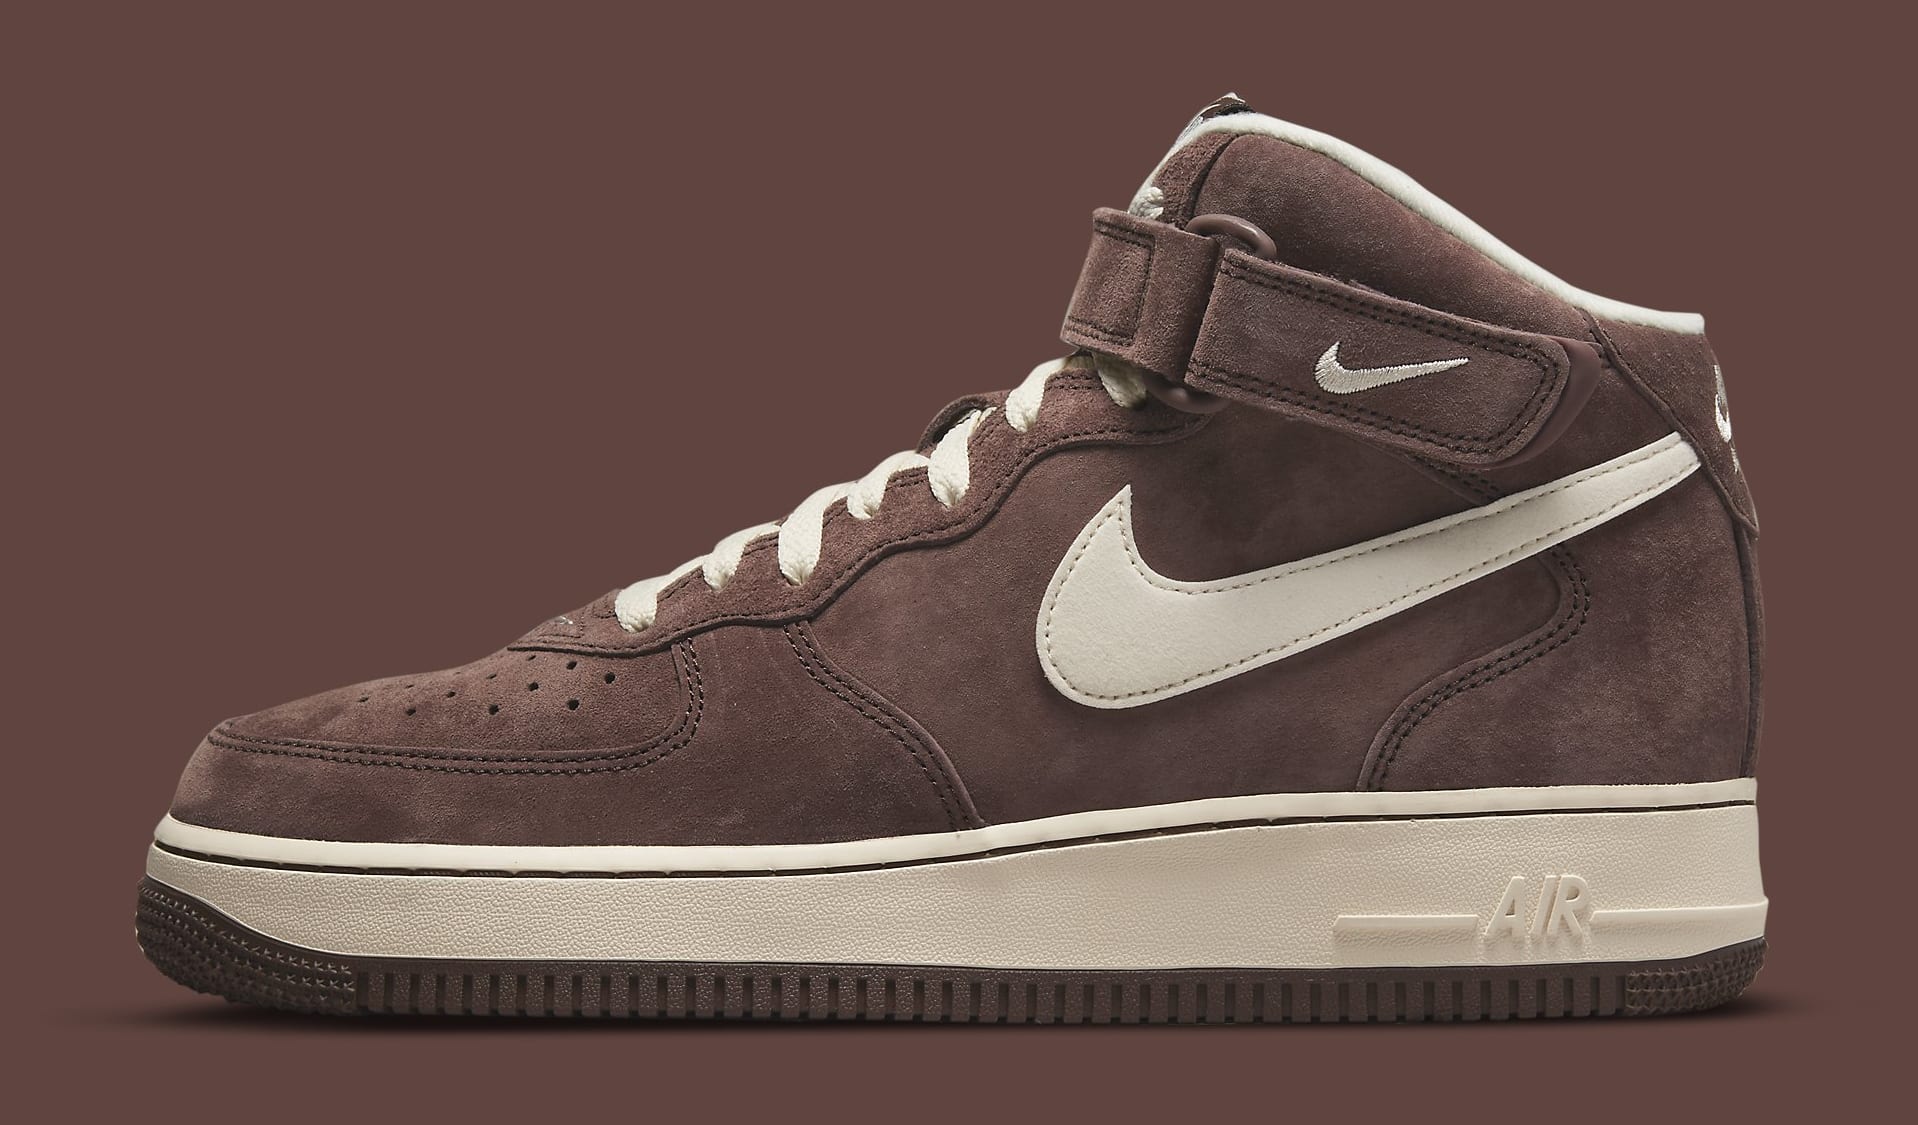 Nike Air Force 1 Mid 'Chocolate' DM0107 200 Lateral